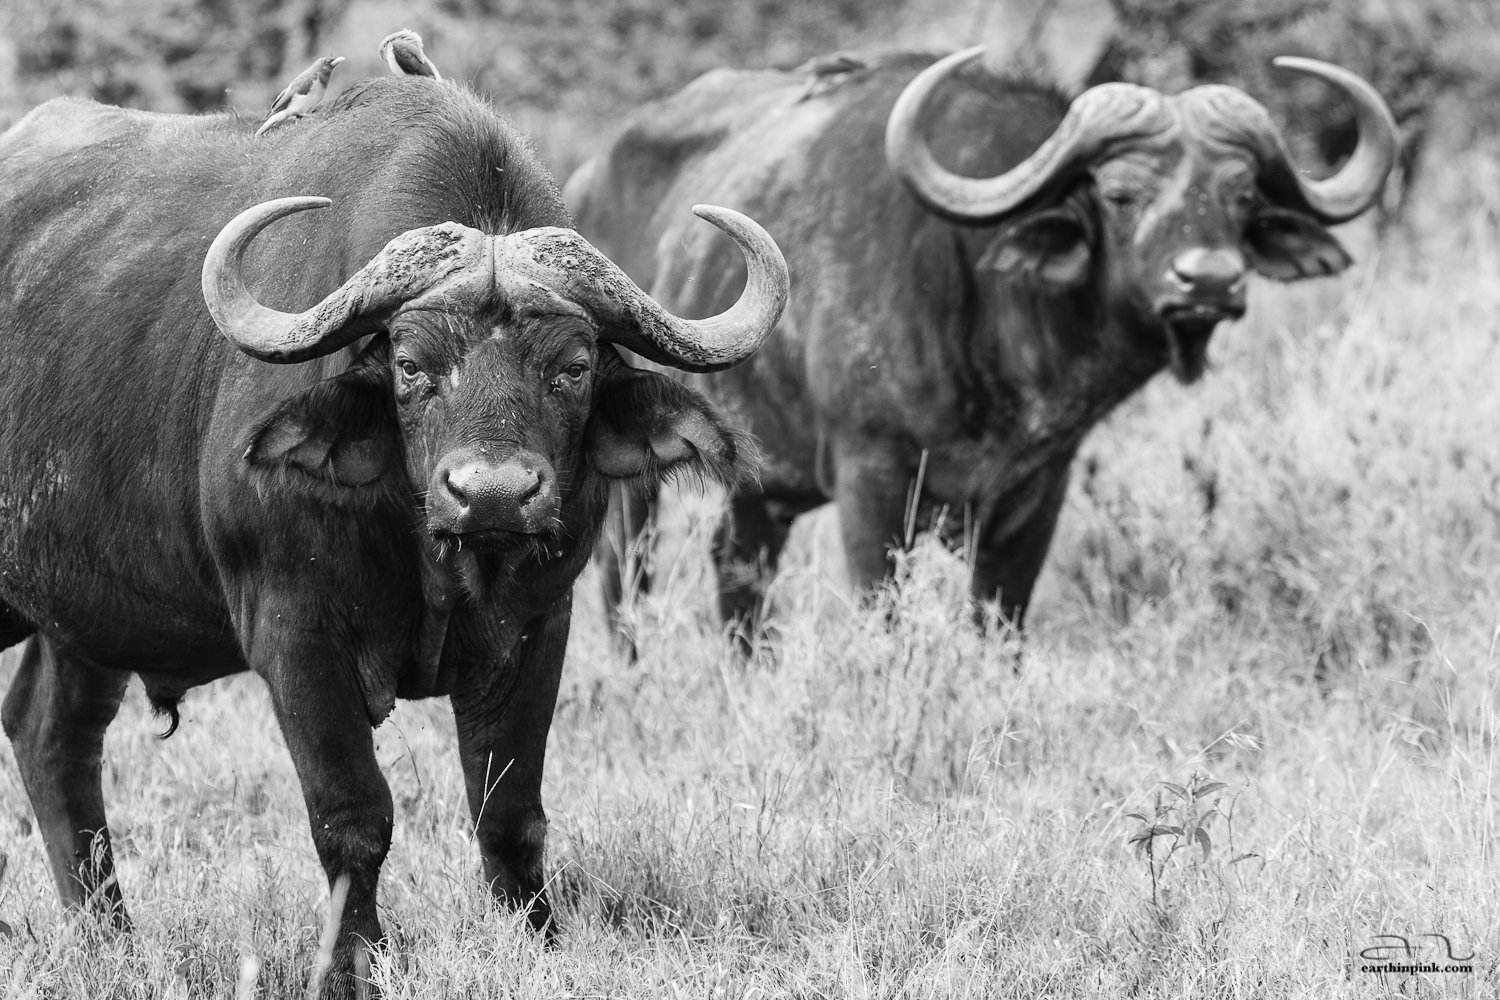 A buffalo is eyeing the camera suspiciously while two birds hitch a ride on its back.